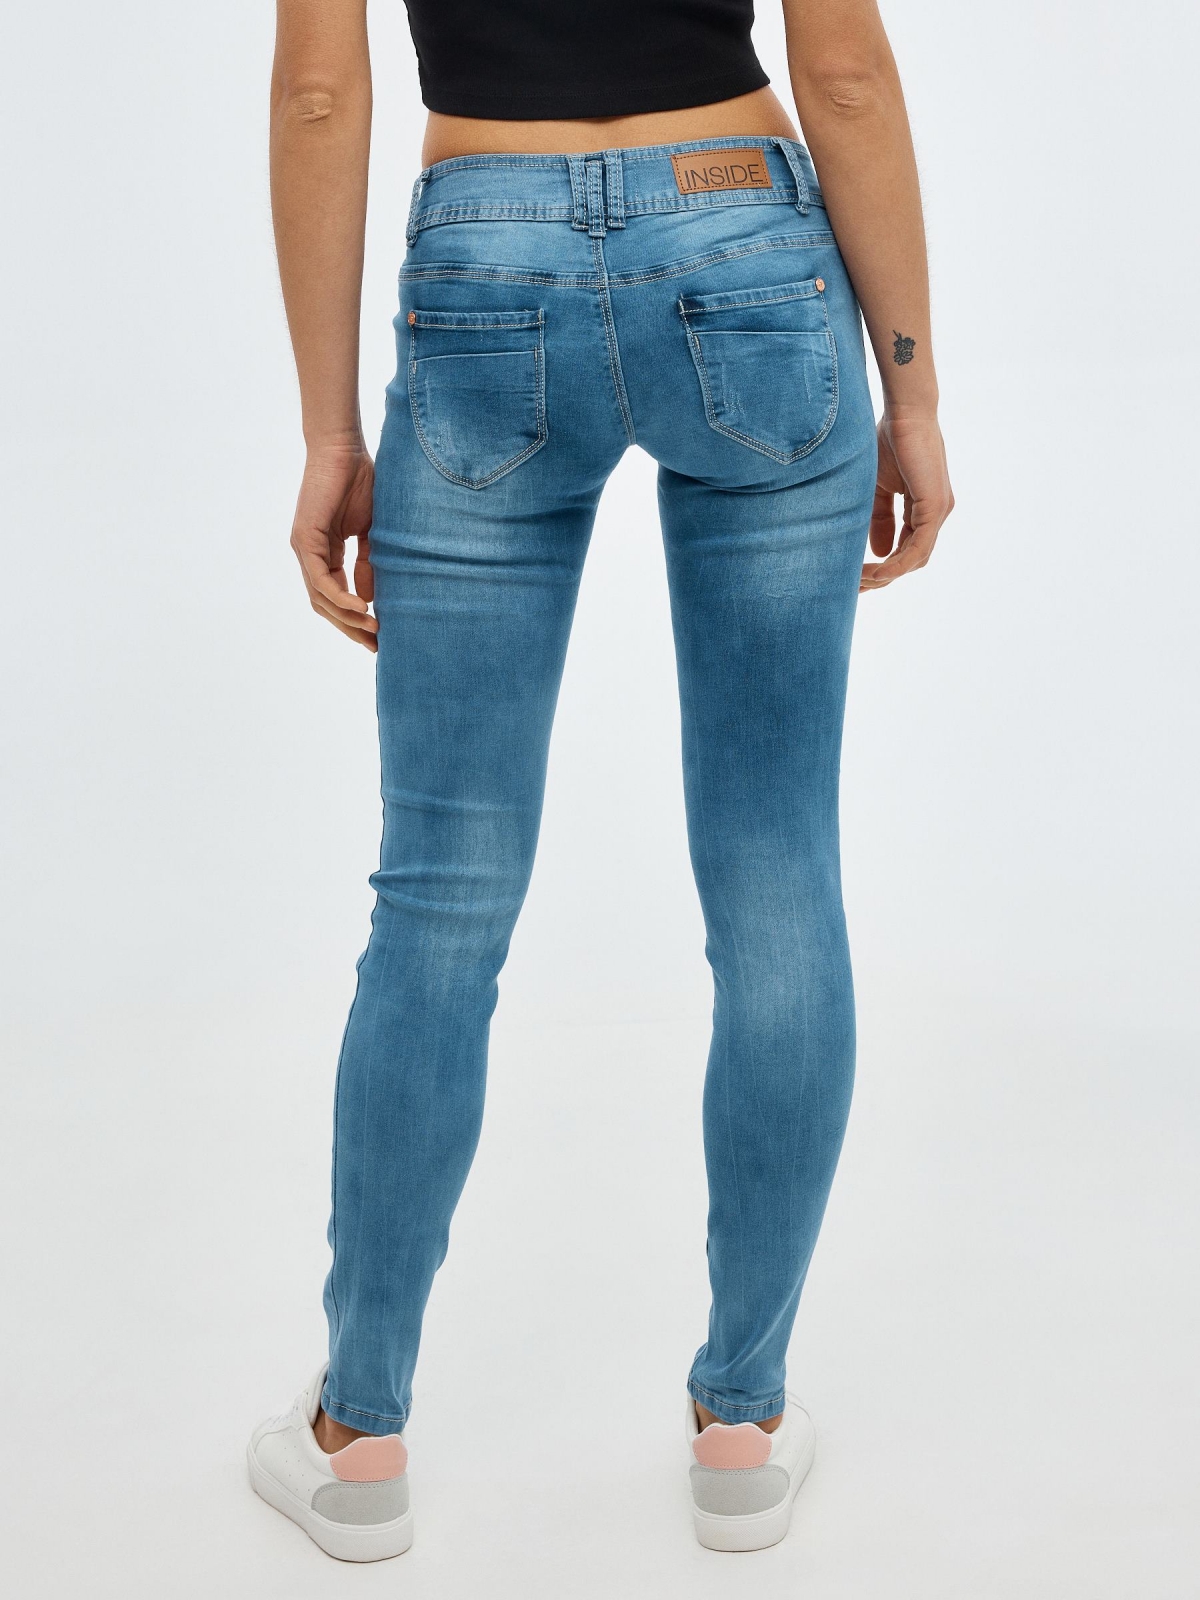 Low rise washed effect skinny jeans blue middle back view